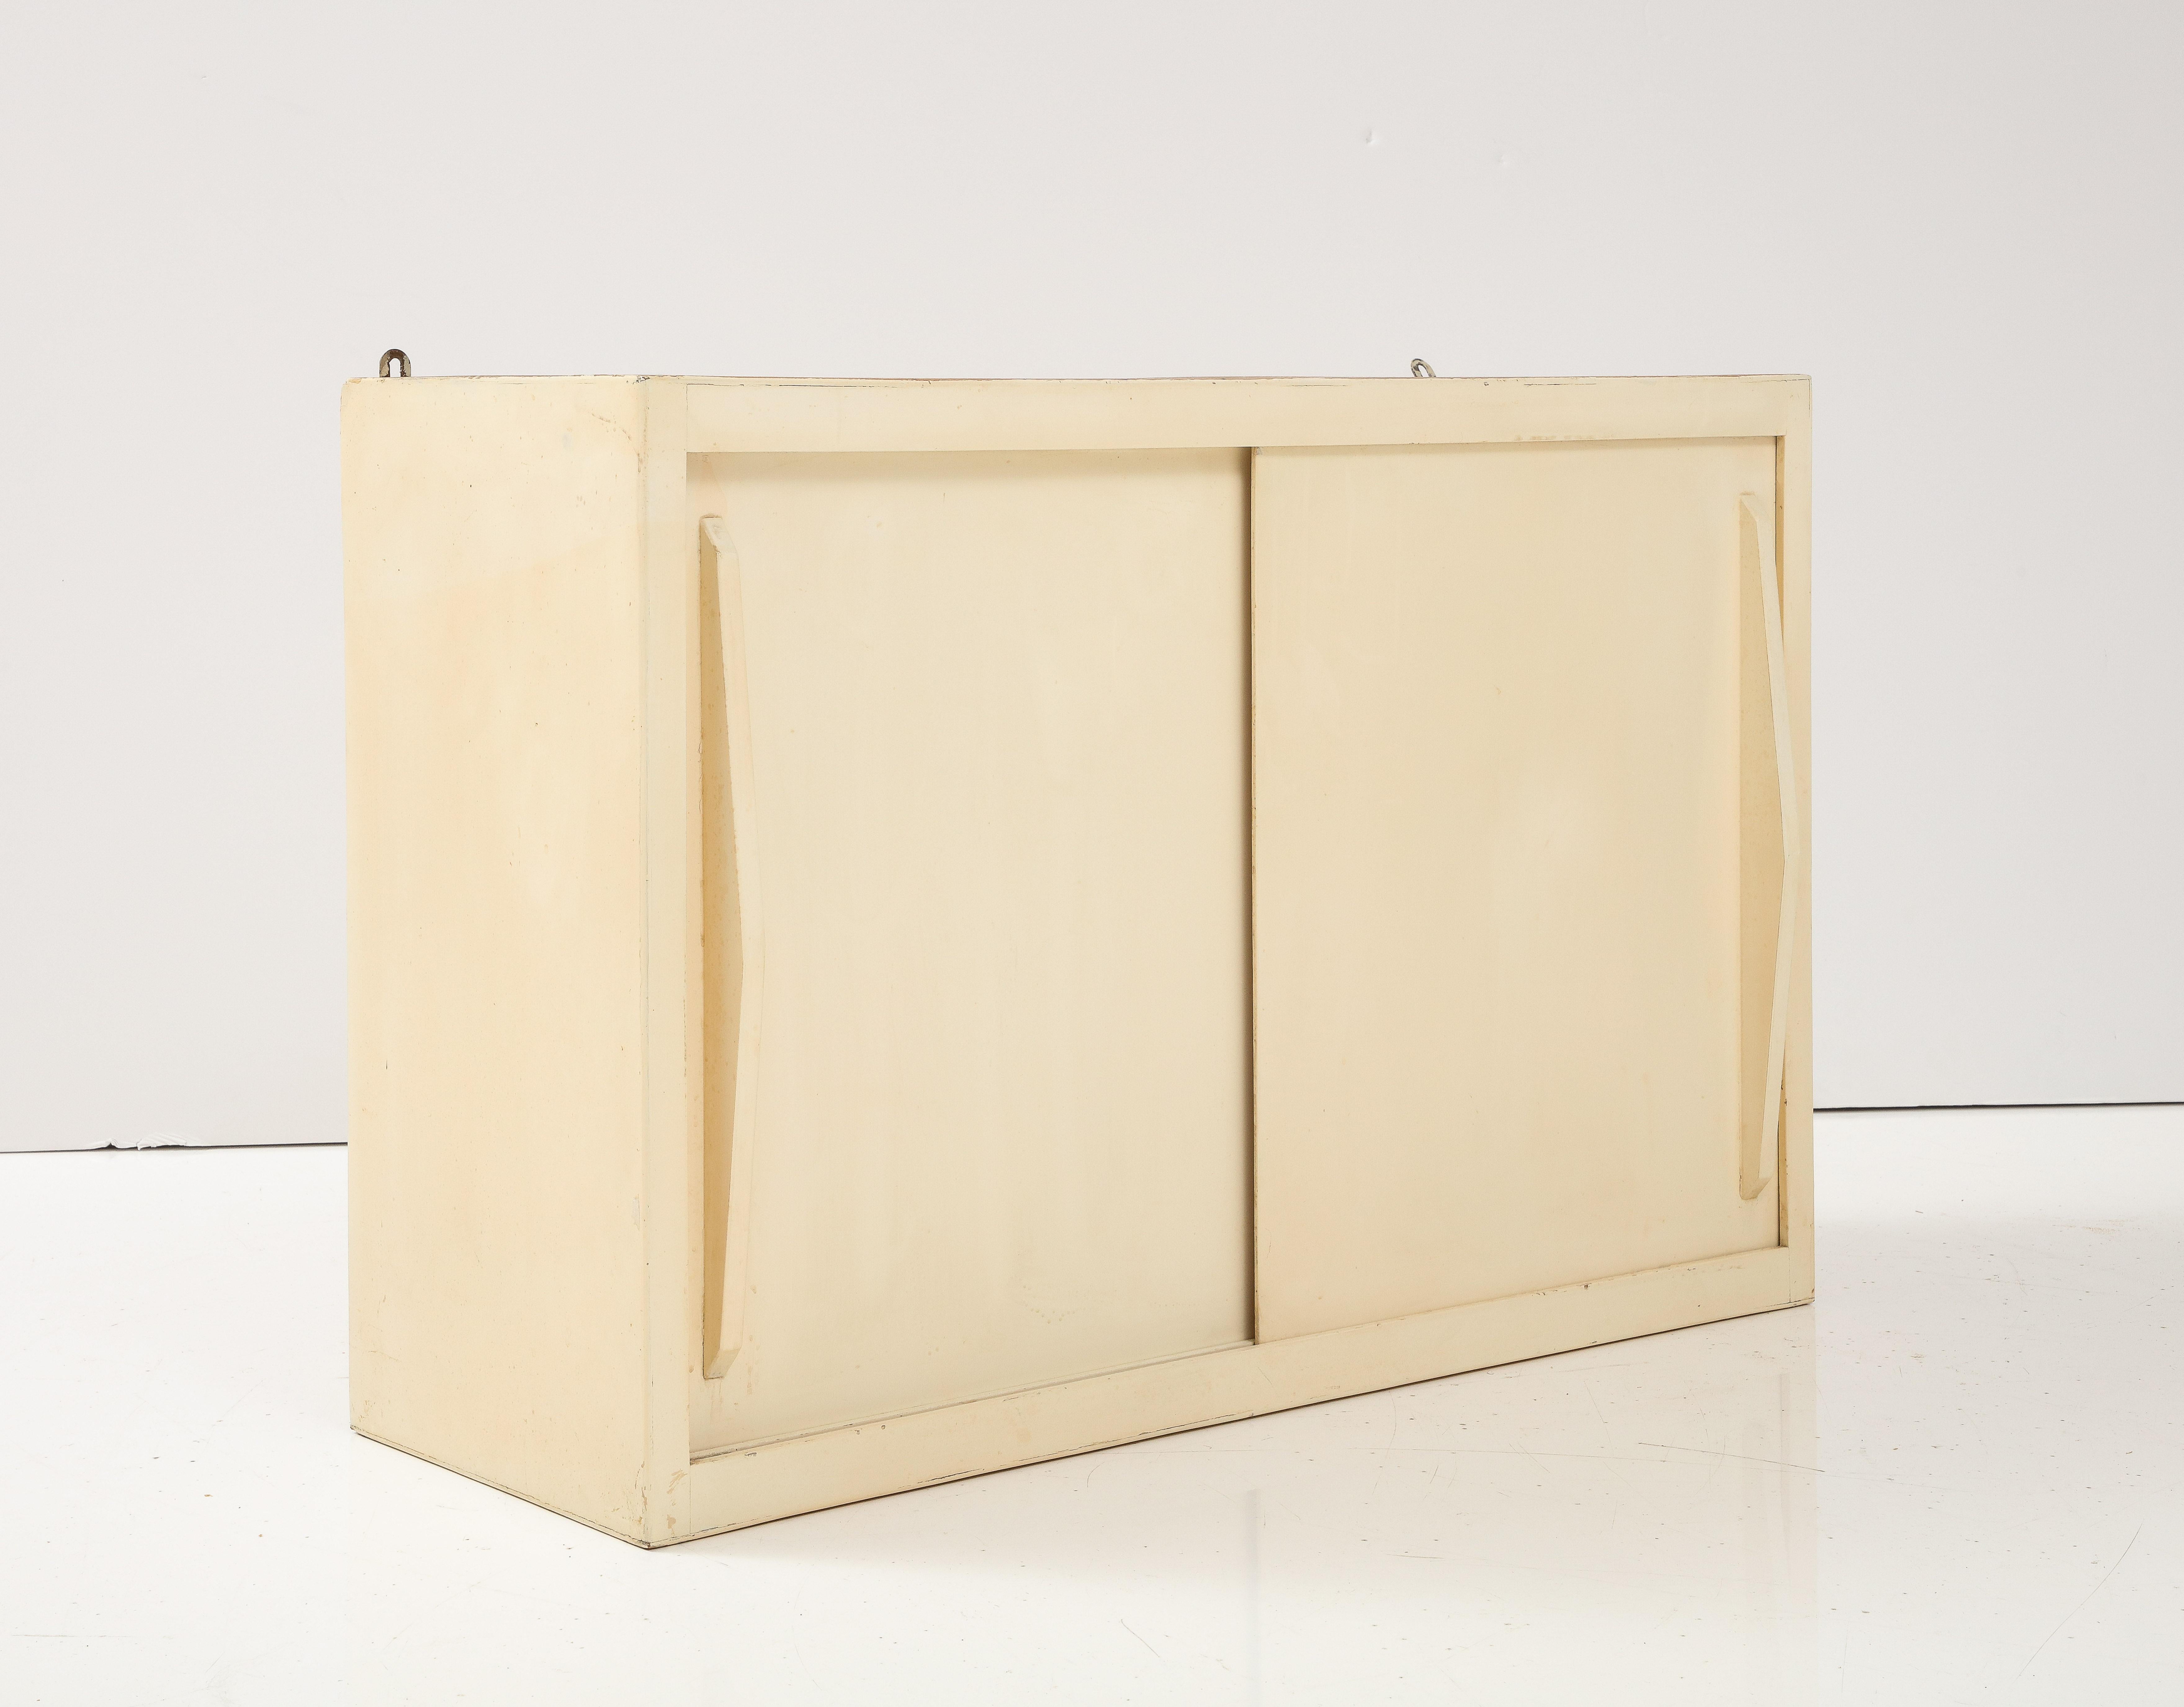 Wood Bon Marché Off-White Modern Corbusier Prouvé Style Wall Cabinets, France, 1950's